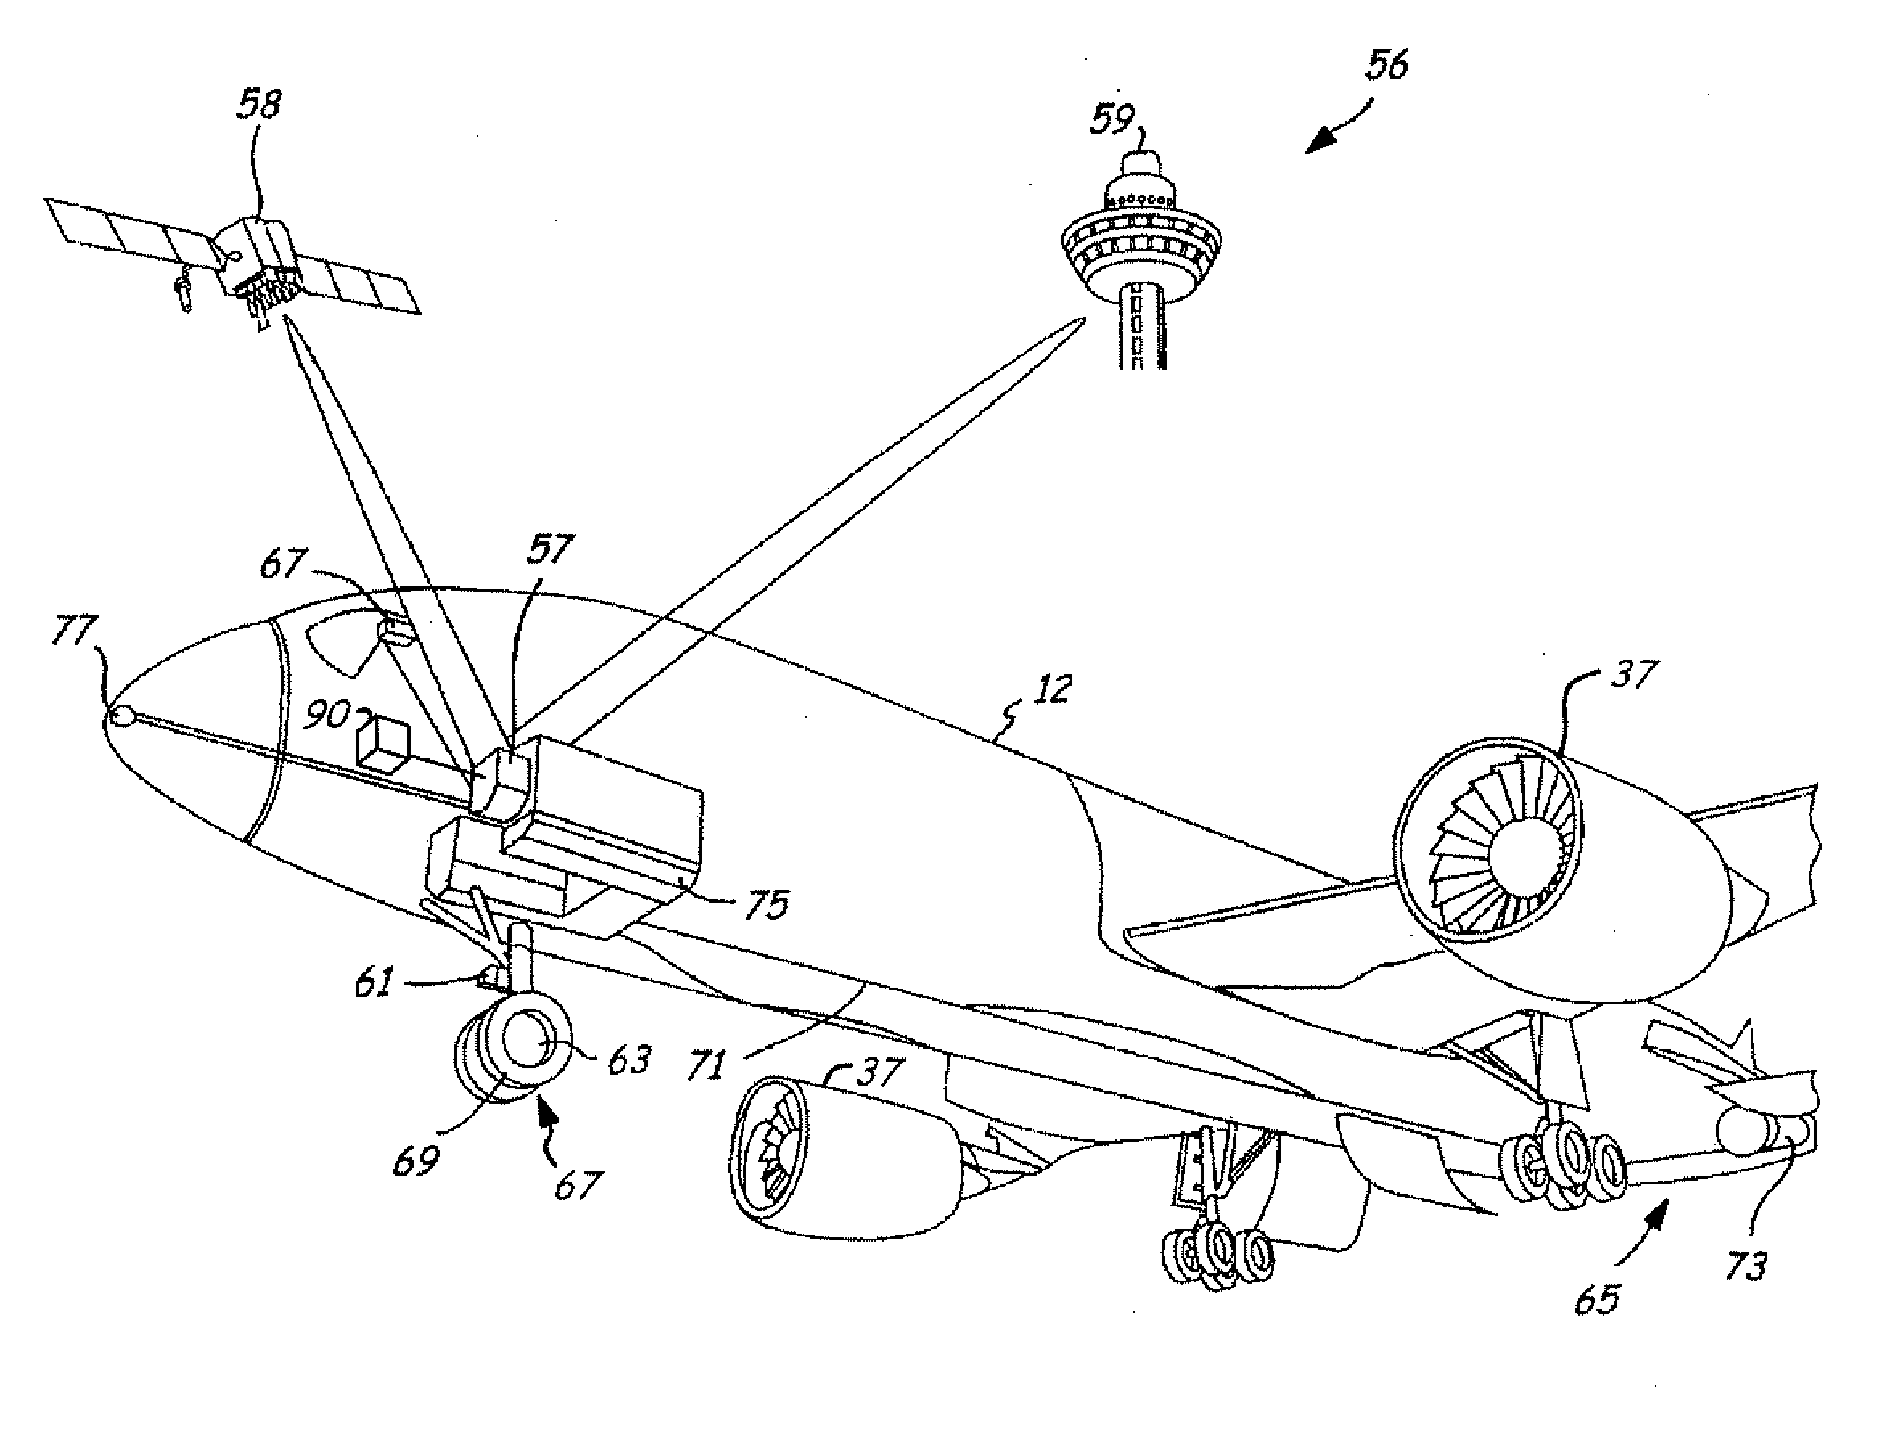 Powered nose aircraft wheel system